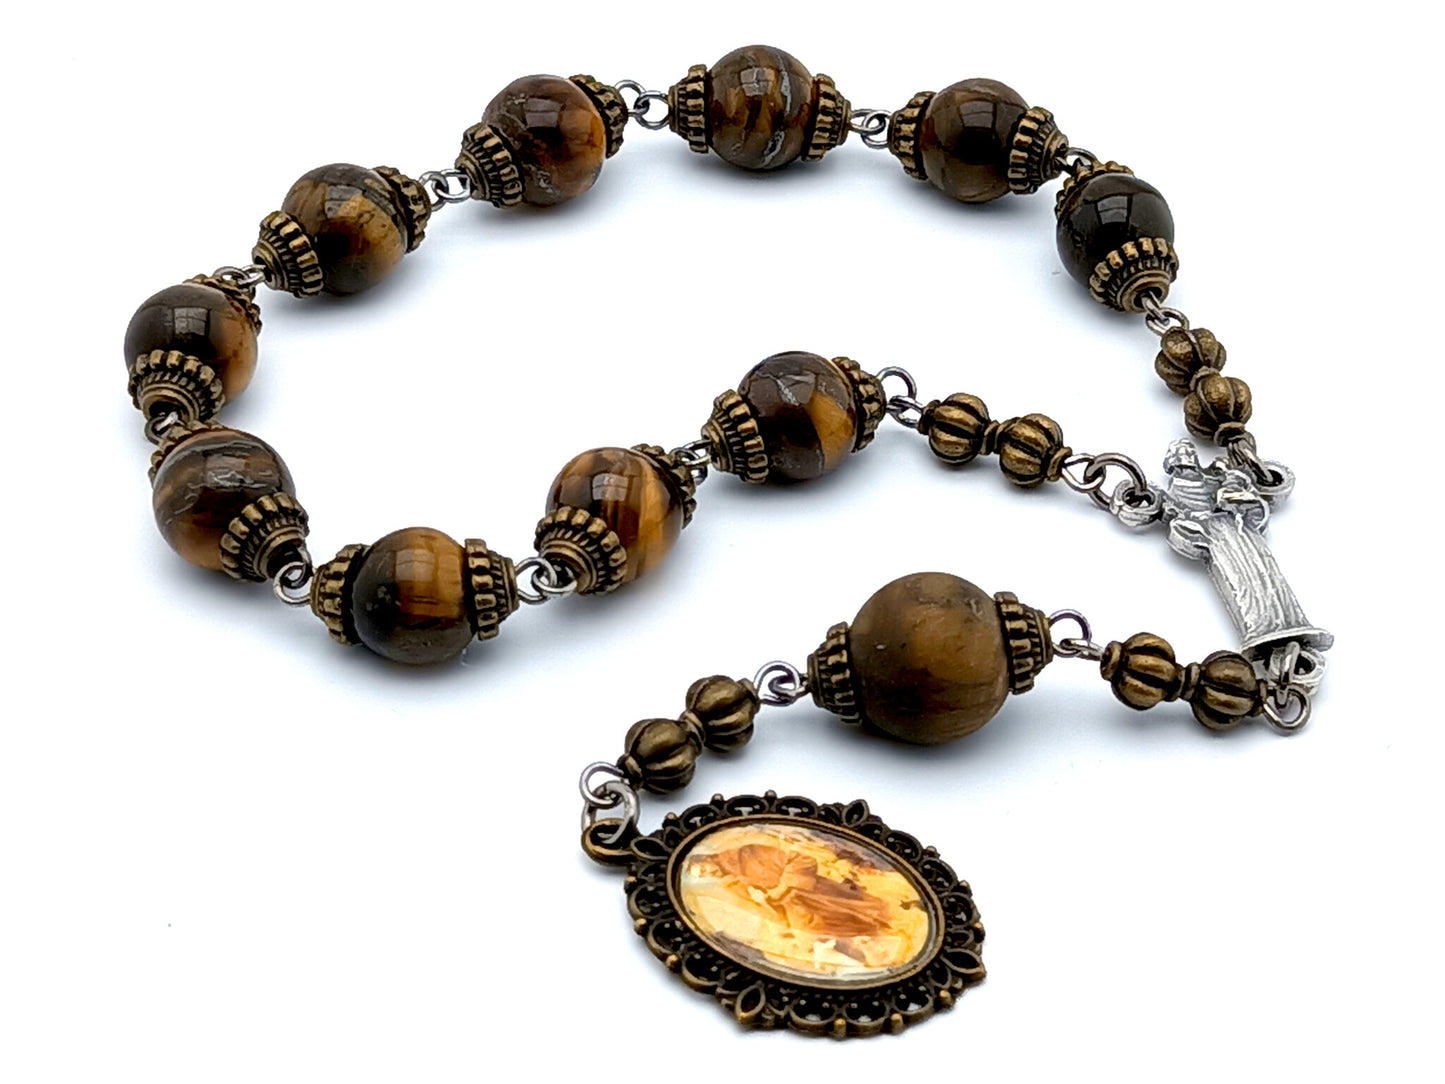 Saint Francis of Assisi unique rosary beads single decade rosary with tigers eye gemstone beads, silver statue centre medal and picture end medal.